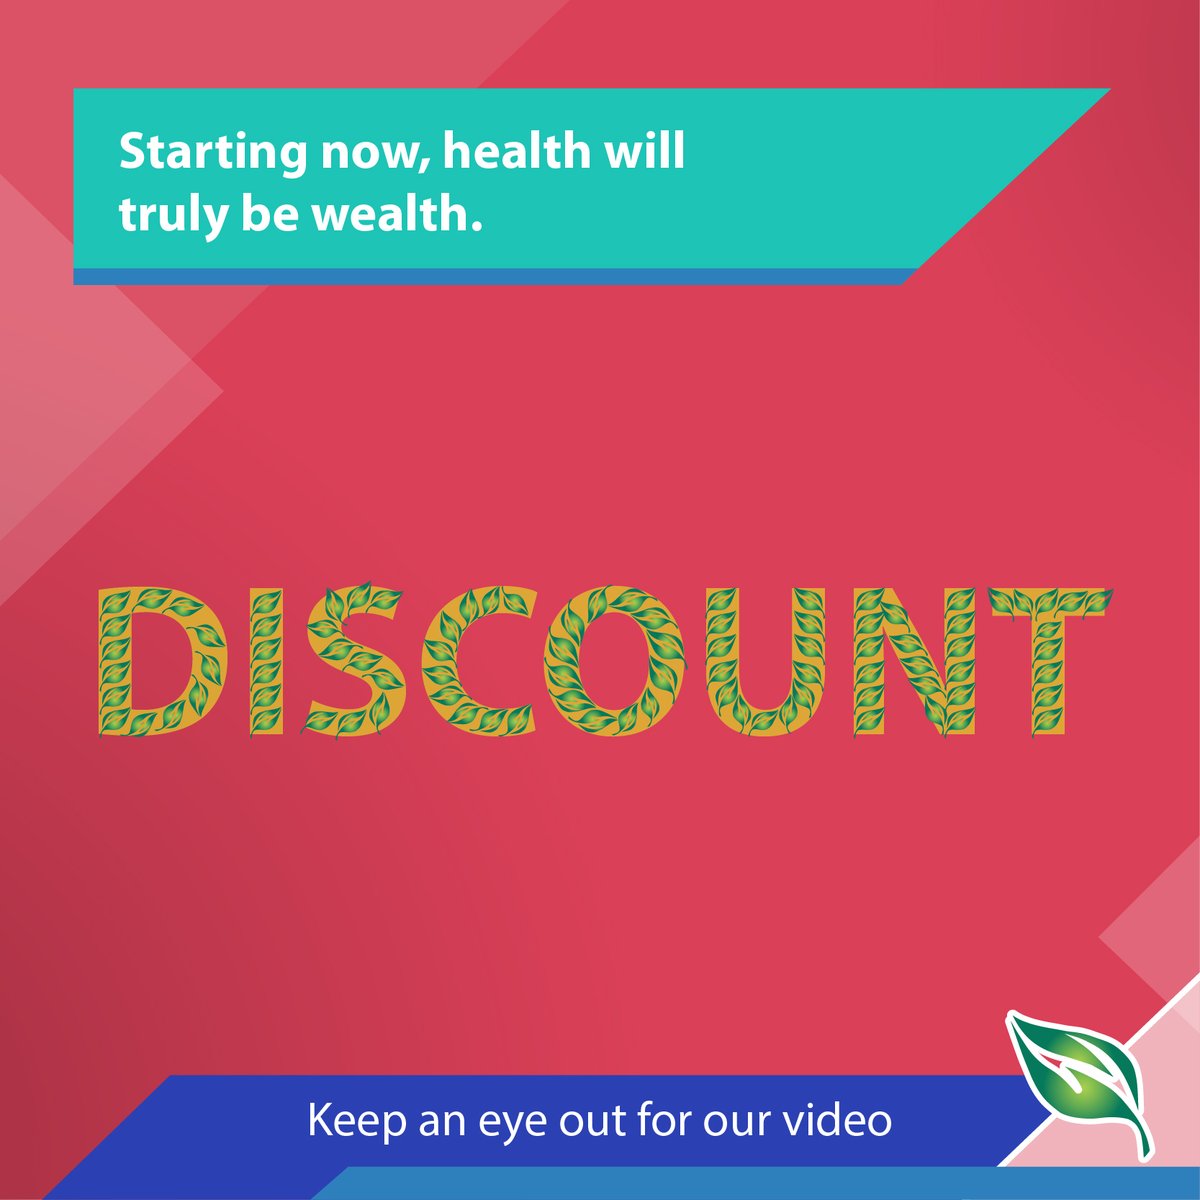 The assurance of health.
The benefits of choice, comfort and flexibility.

Visit unioninsurance.ae
#AffordableWellness